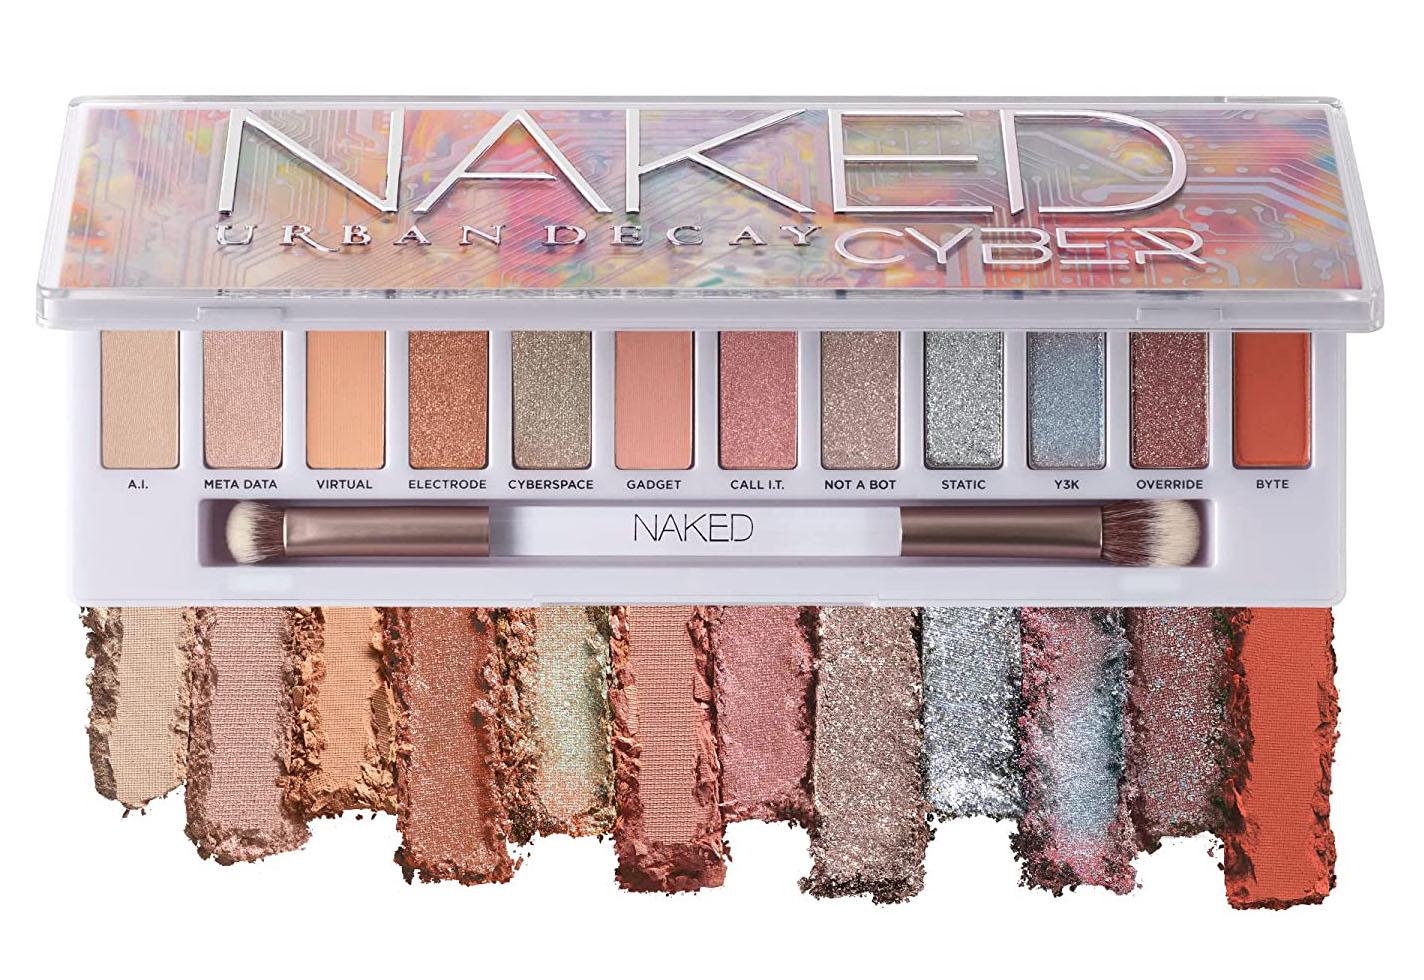 12-Shade Urban Decay Naked Cyber Vegan Eyeshadow Palette for $29.40 Shipped